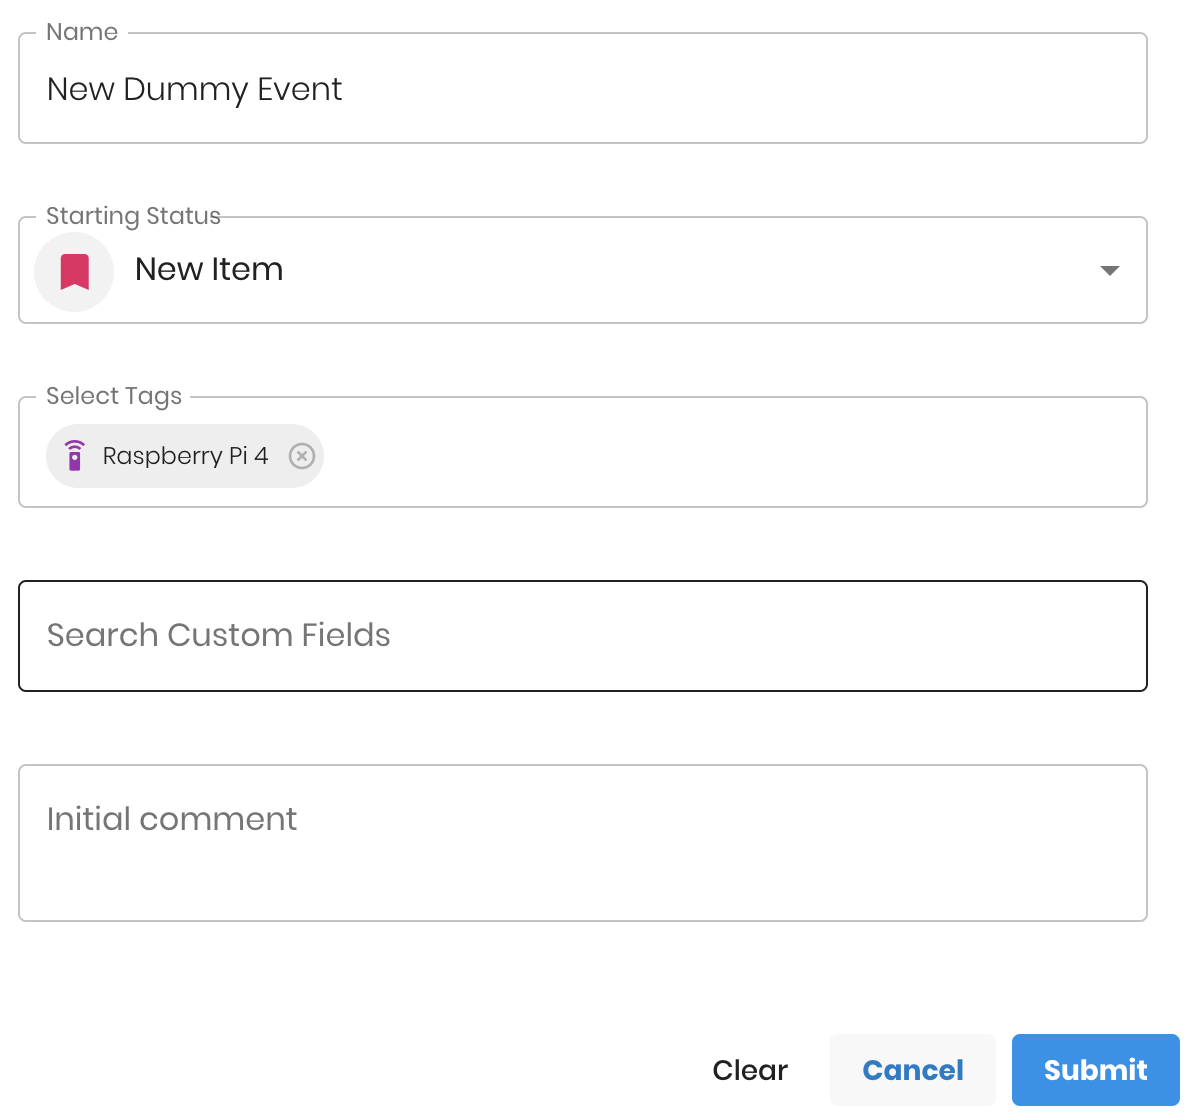 Create Event form for a dummy event